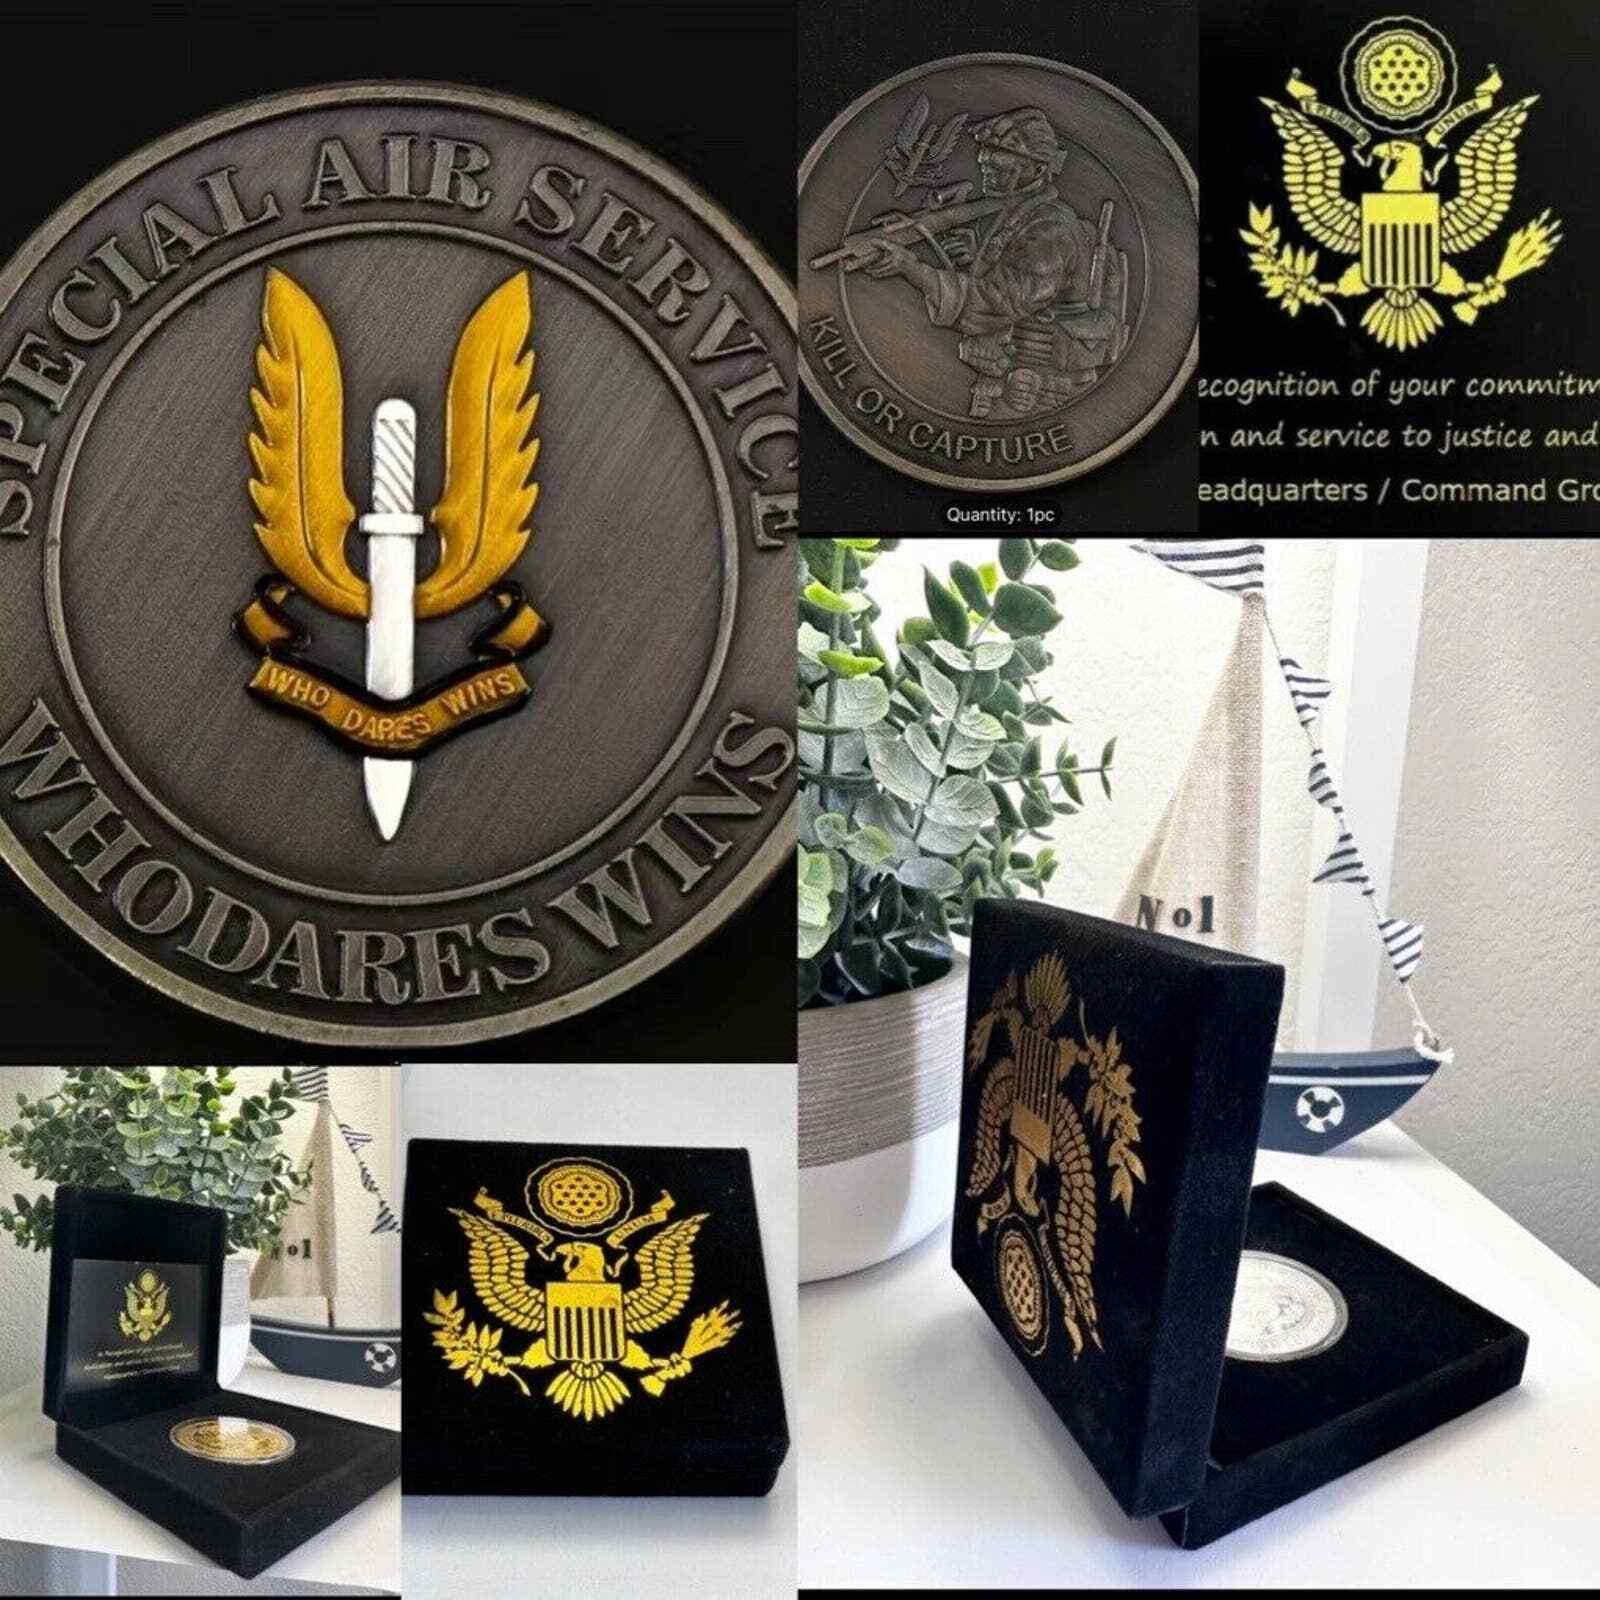 British Army UK Special Air Service WHO DARE WINS Kill or Capture Challenge Coin